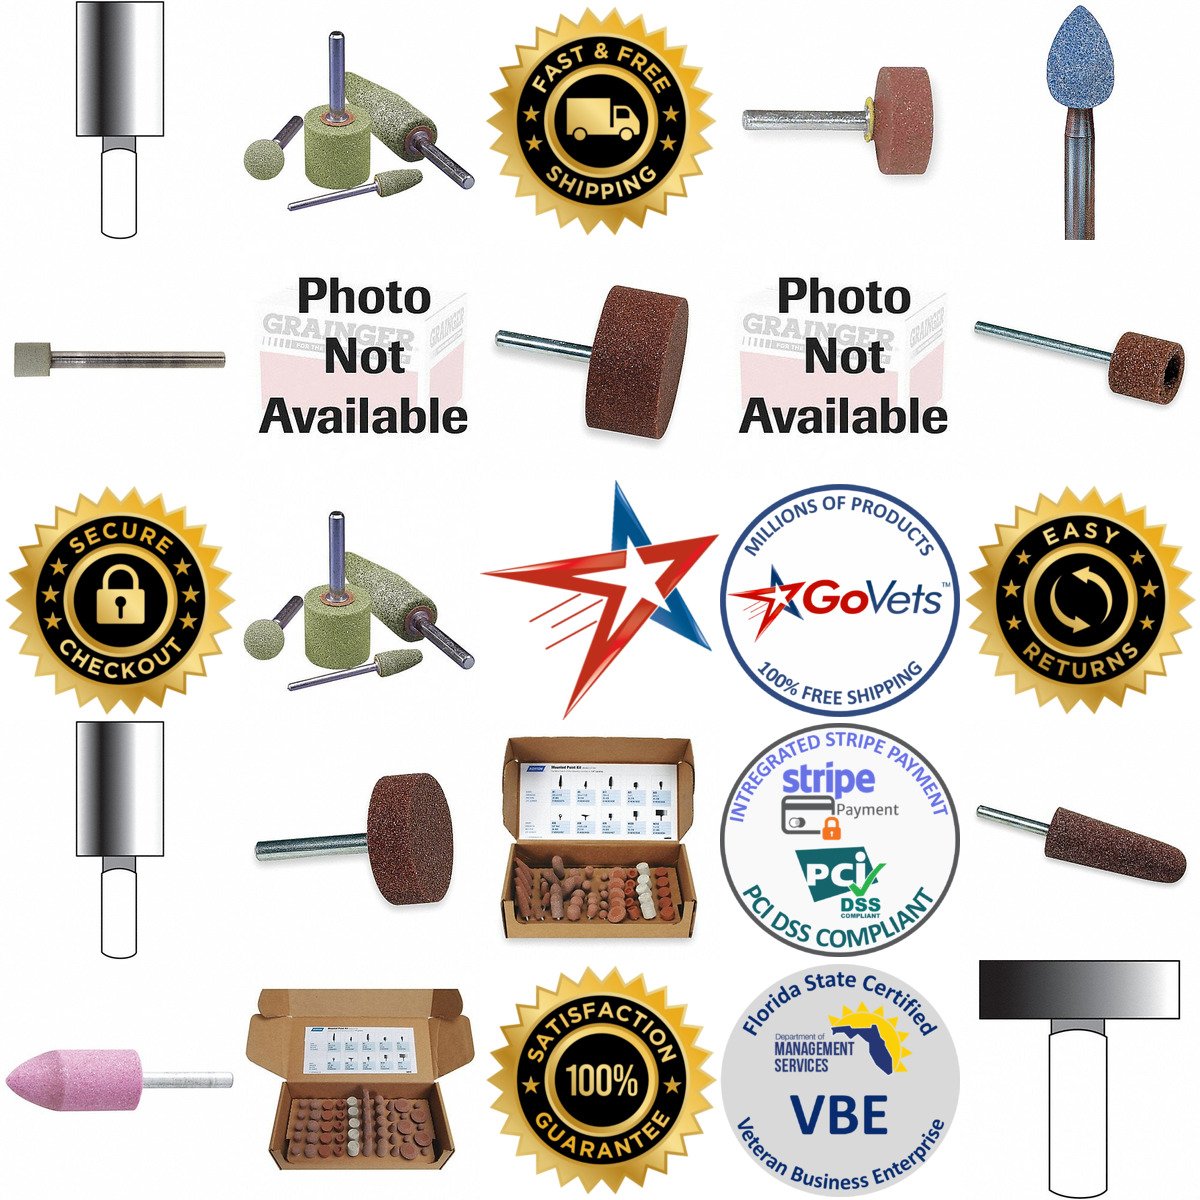 A selection of Mounted Points and Kits products on GoVets